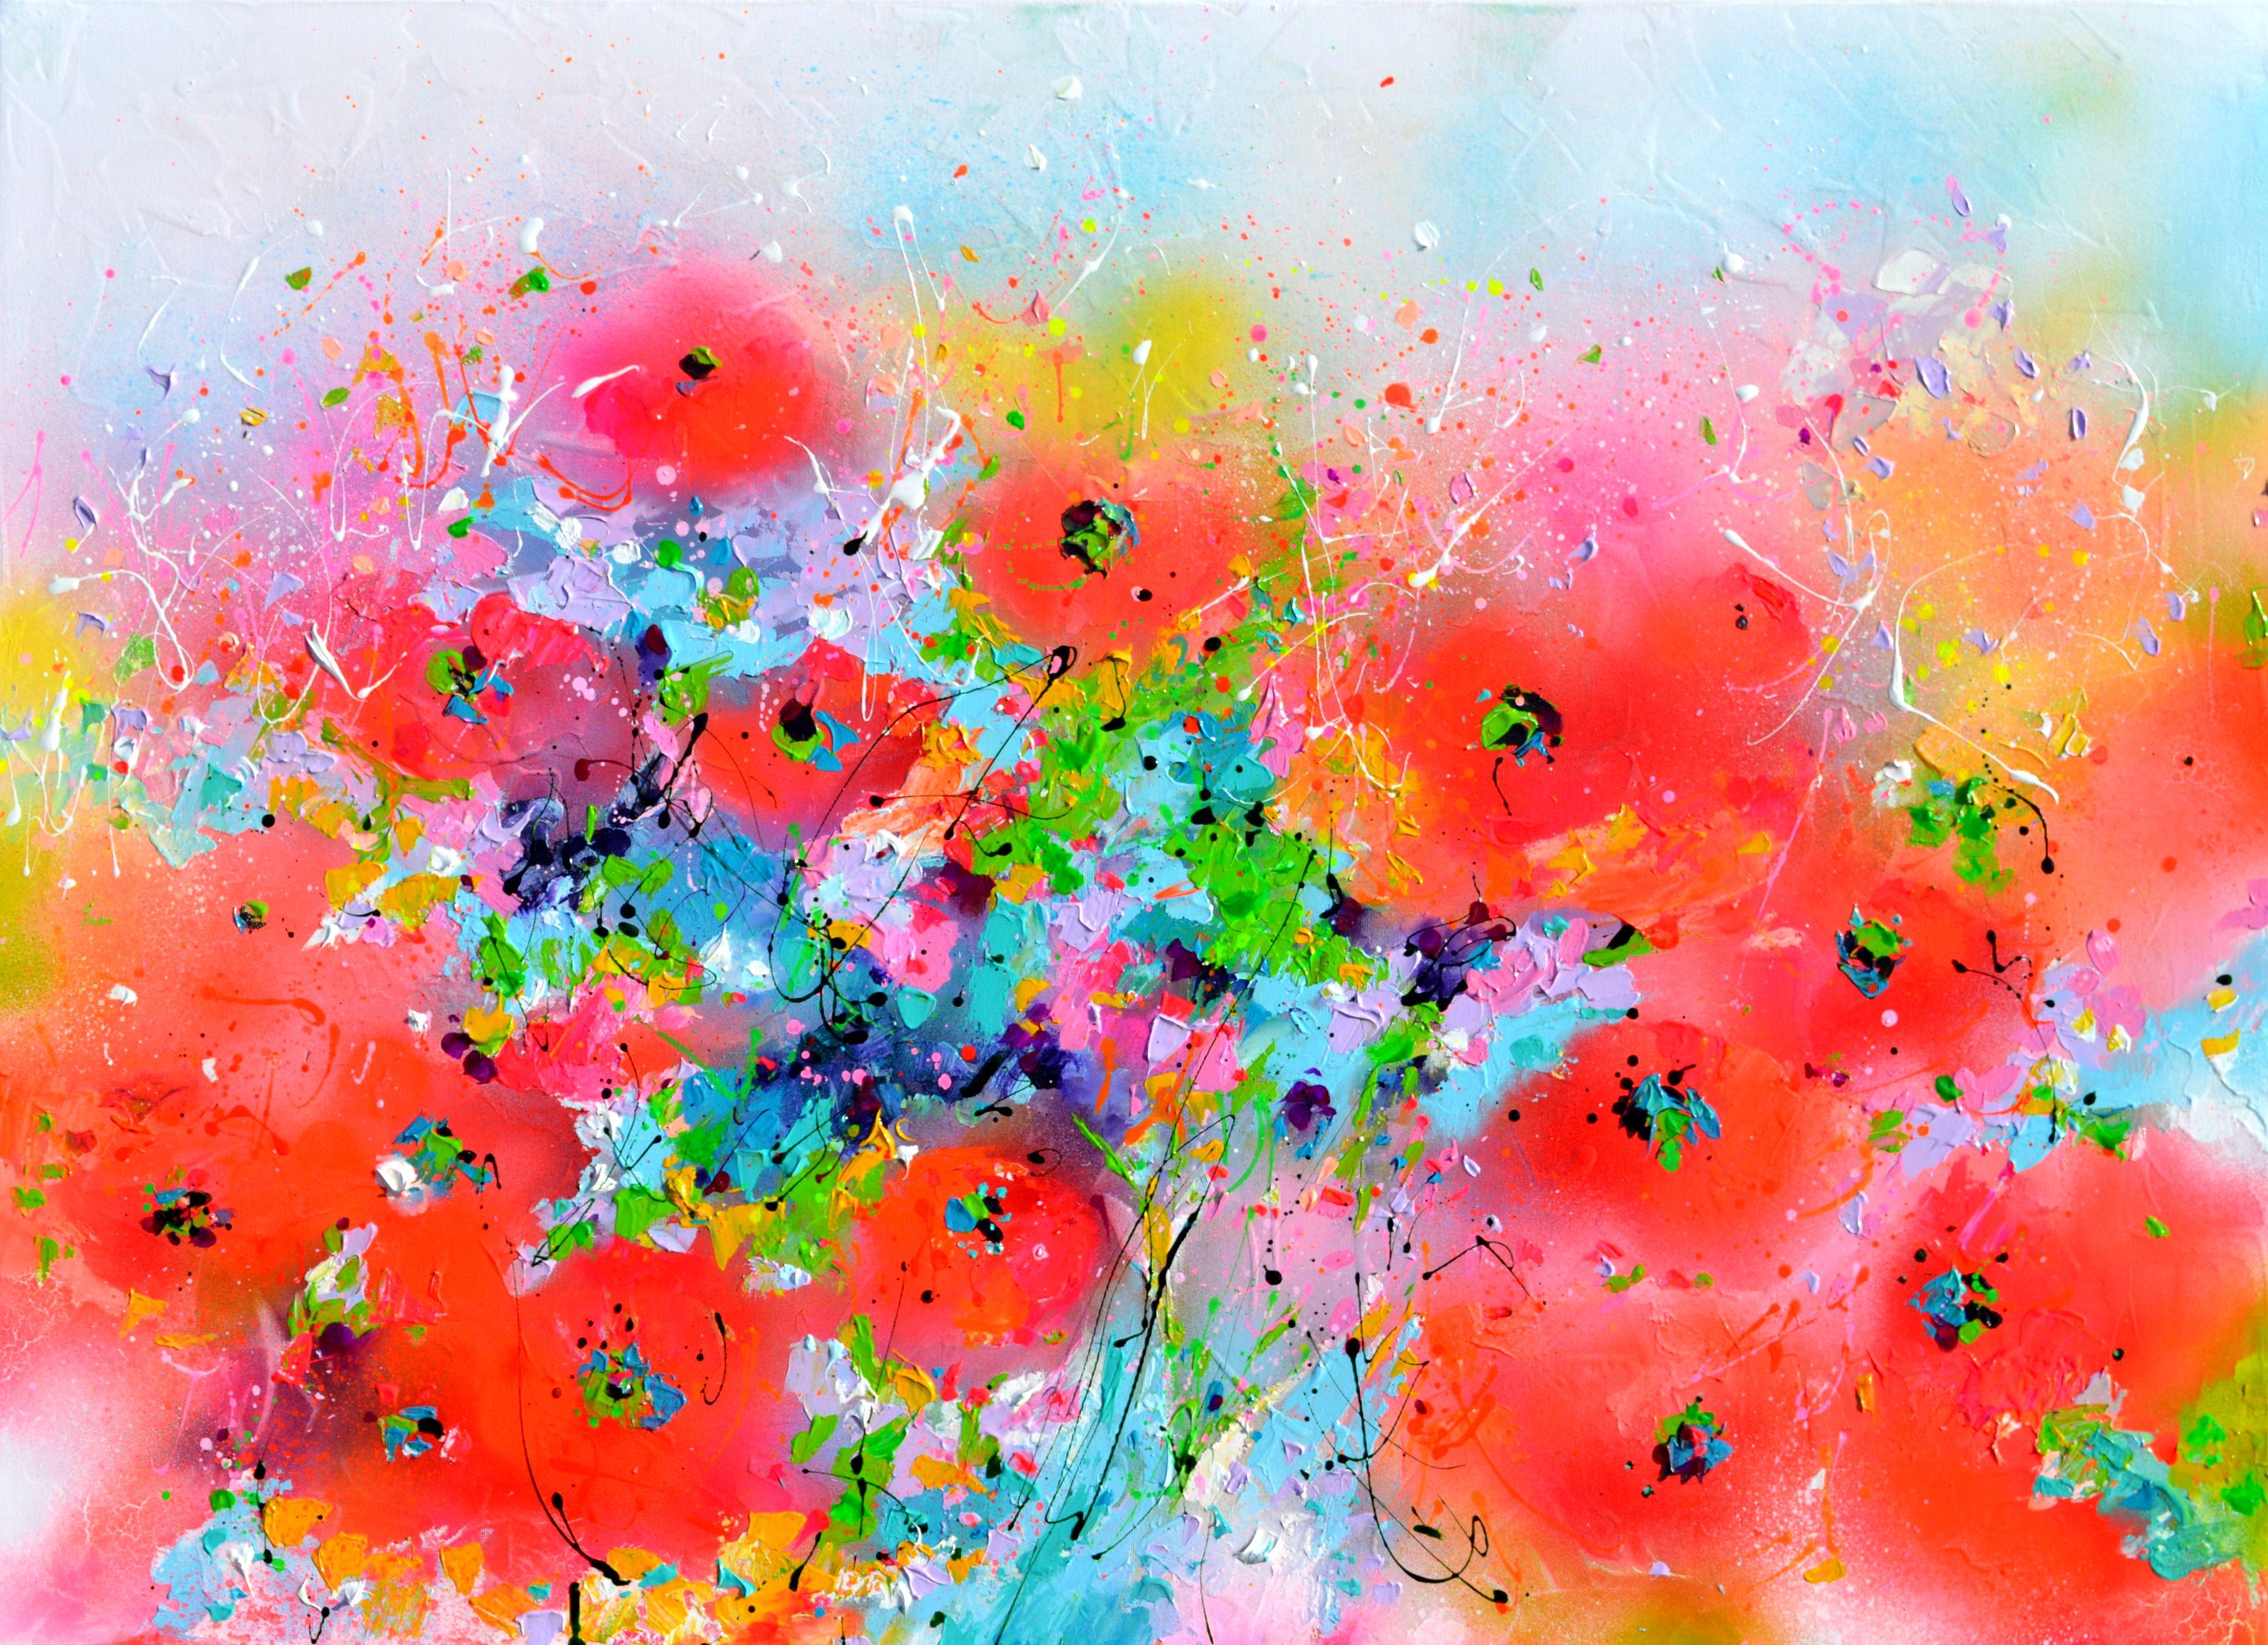 Rich and vibrant flowery sceneries that fulfils my passion for flowers, fields and gardens, that comes in the second place after painting. I am creating this colorful, contrasted and spontaneous blooming paintings by ovelapping layers of acrylics